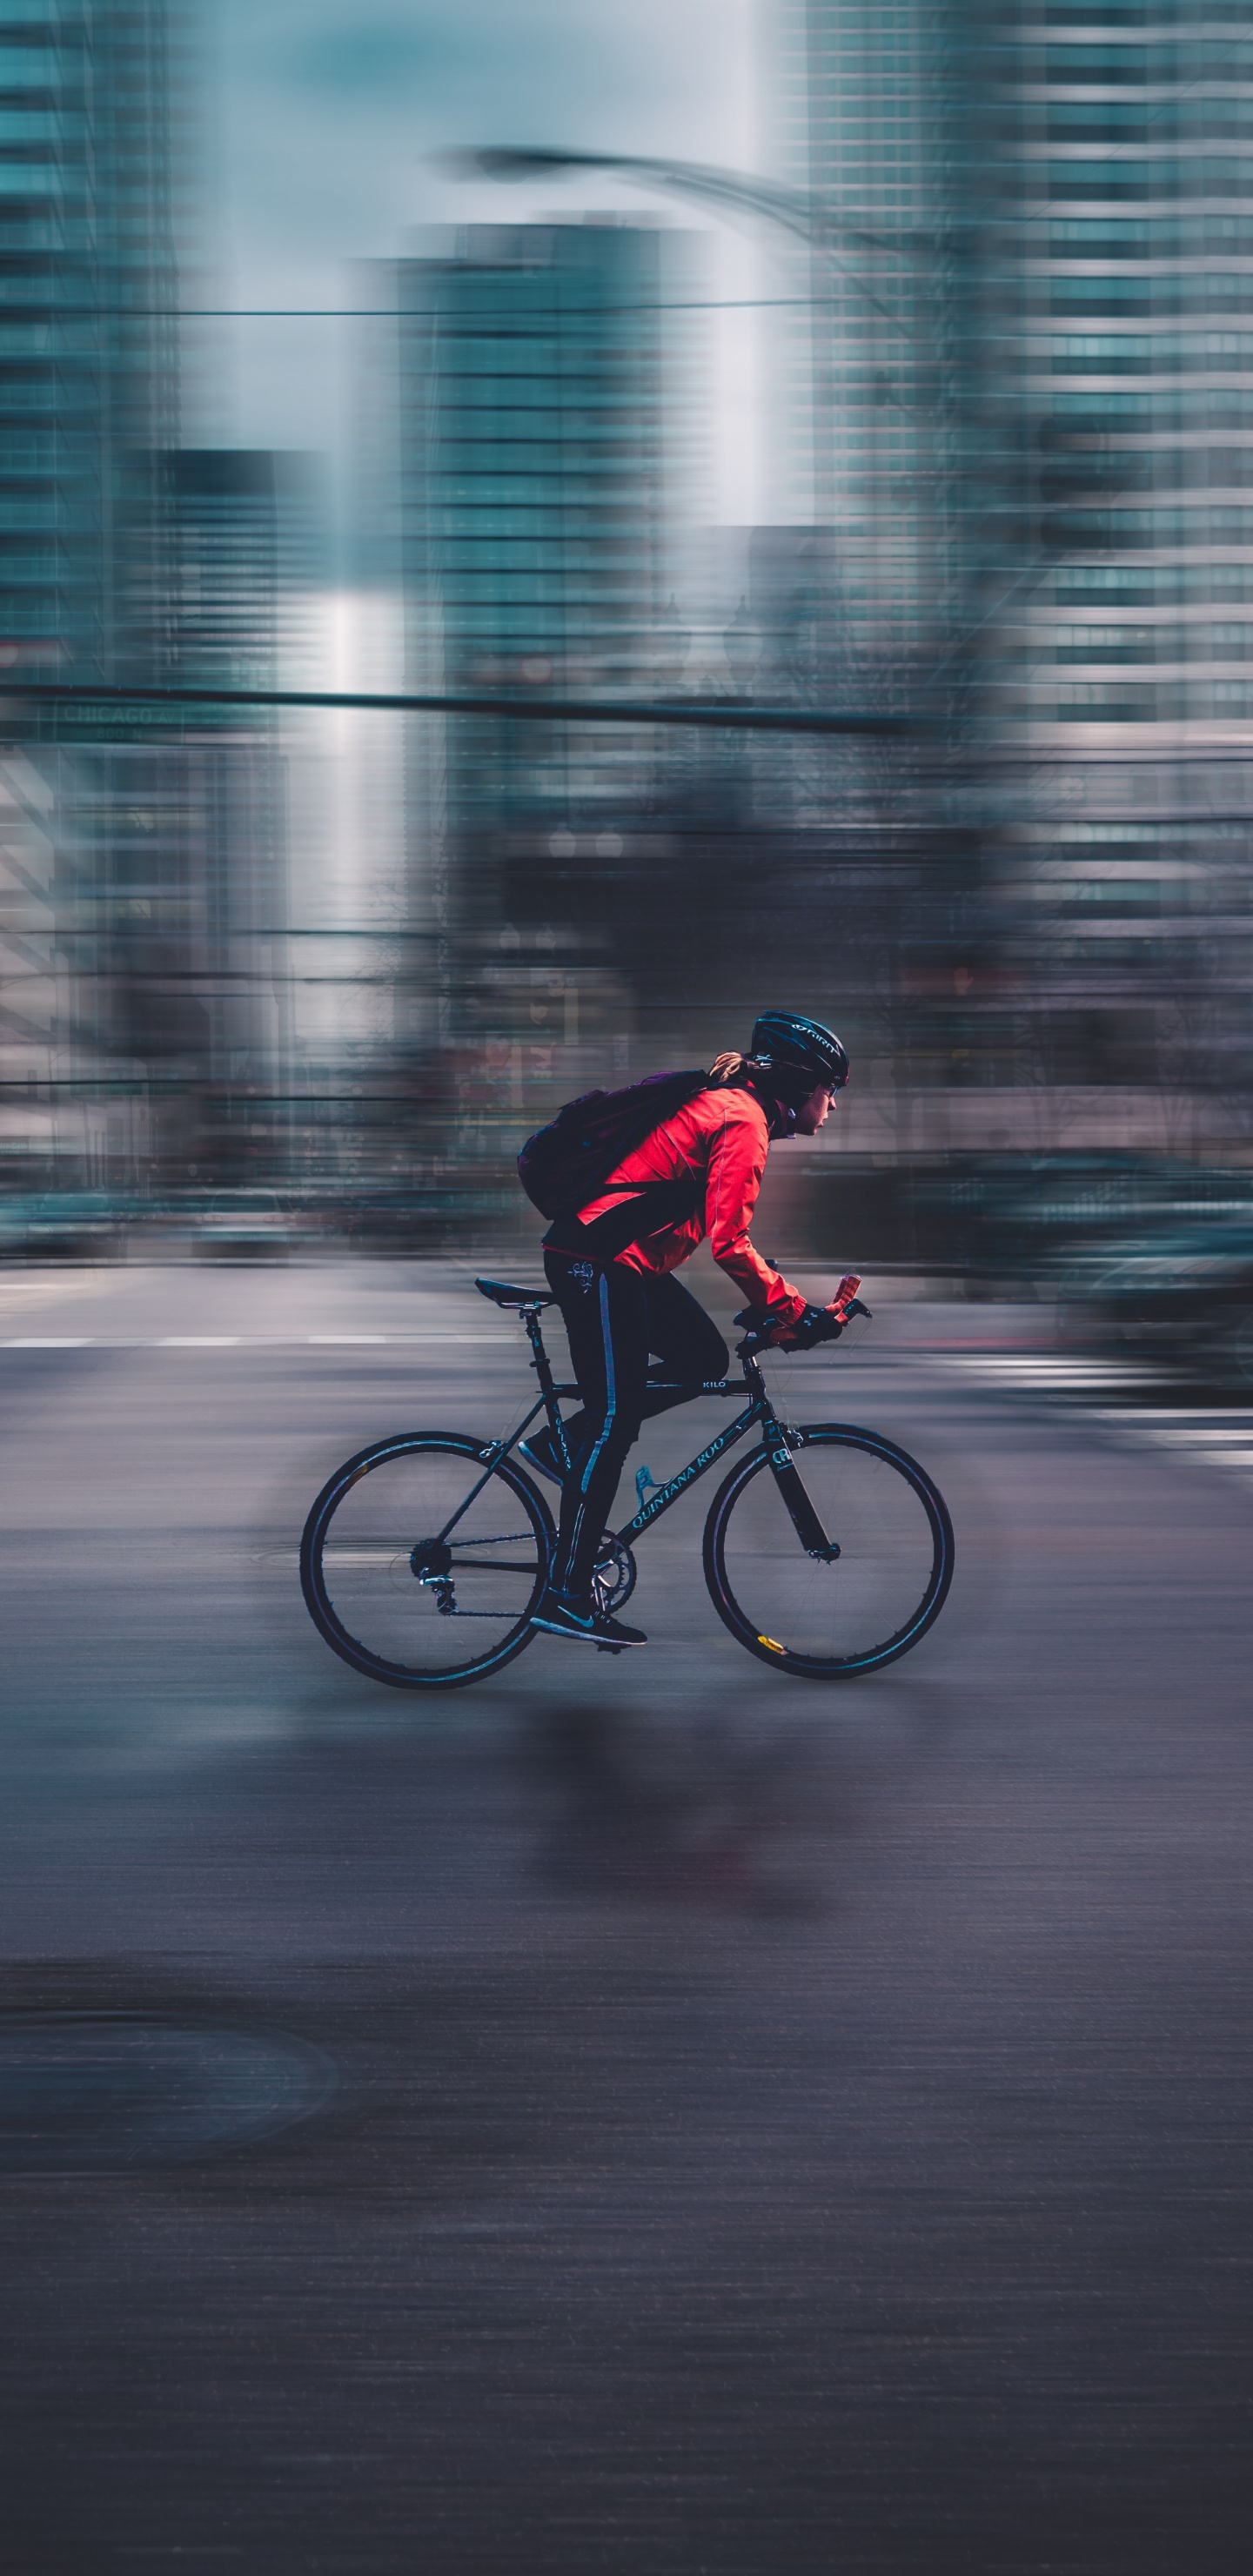 Man in Red Jacket Riding Bicycle on Road During Daytime. Wallpaper in 1440x2960 Resolution